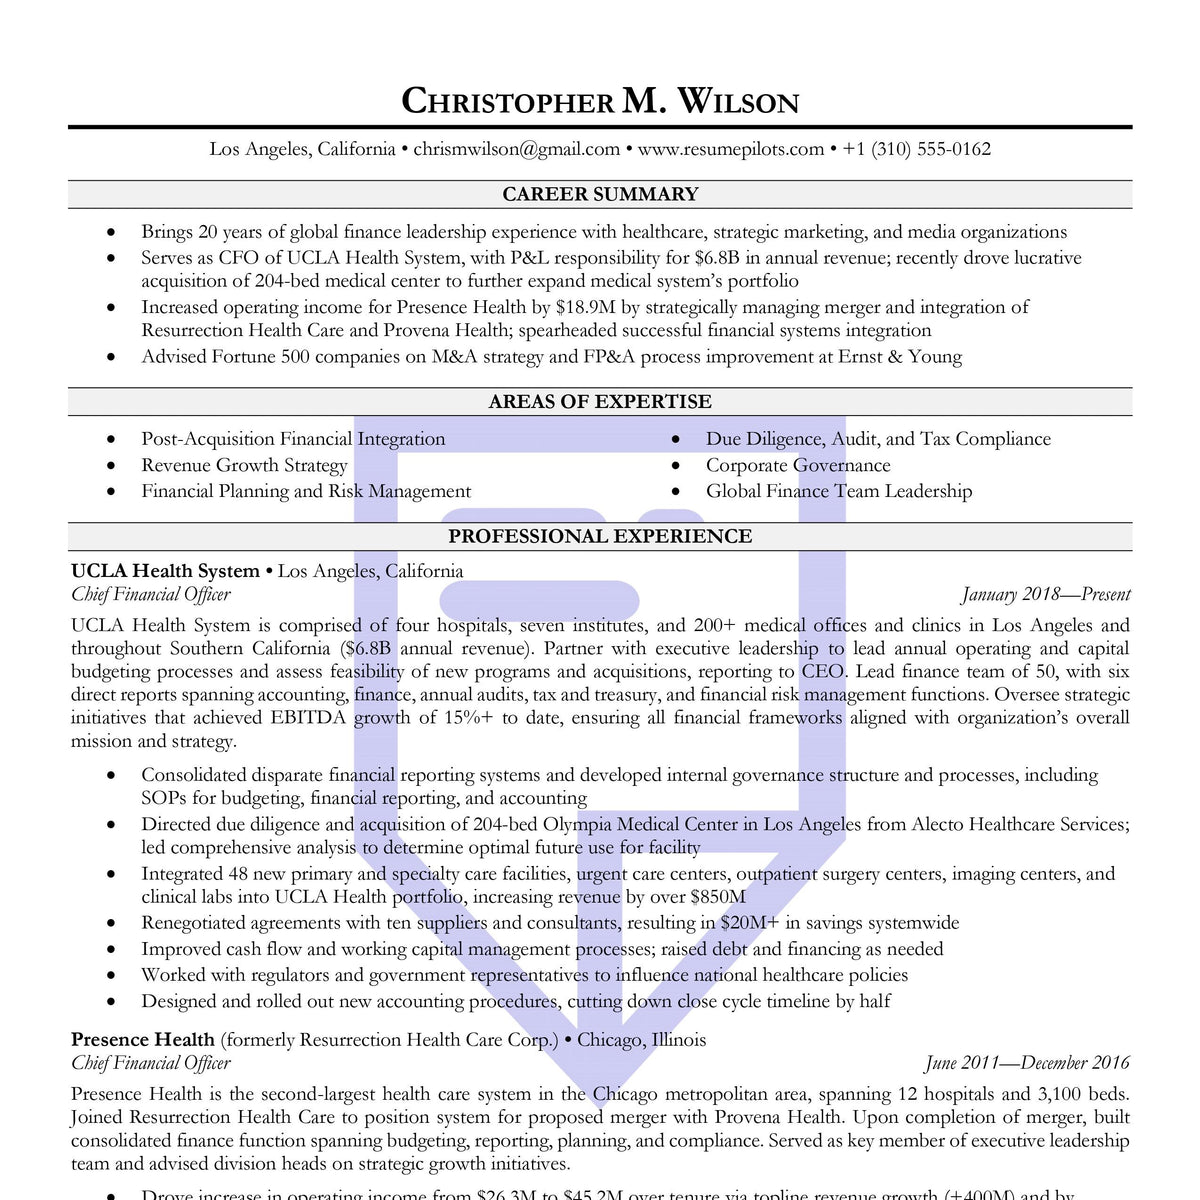 Resume (Template Only) - Outplacement, Resume Writing, and Career